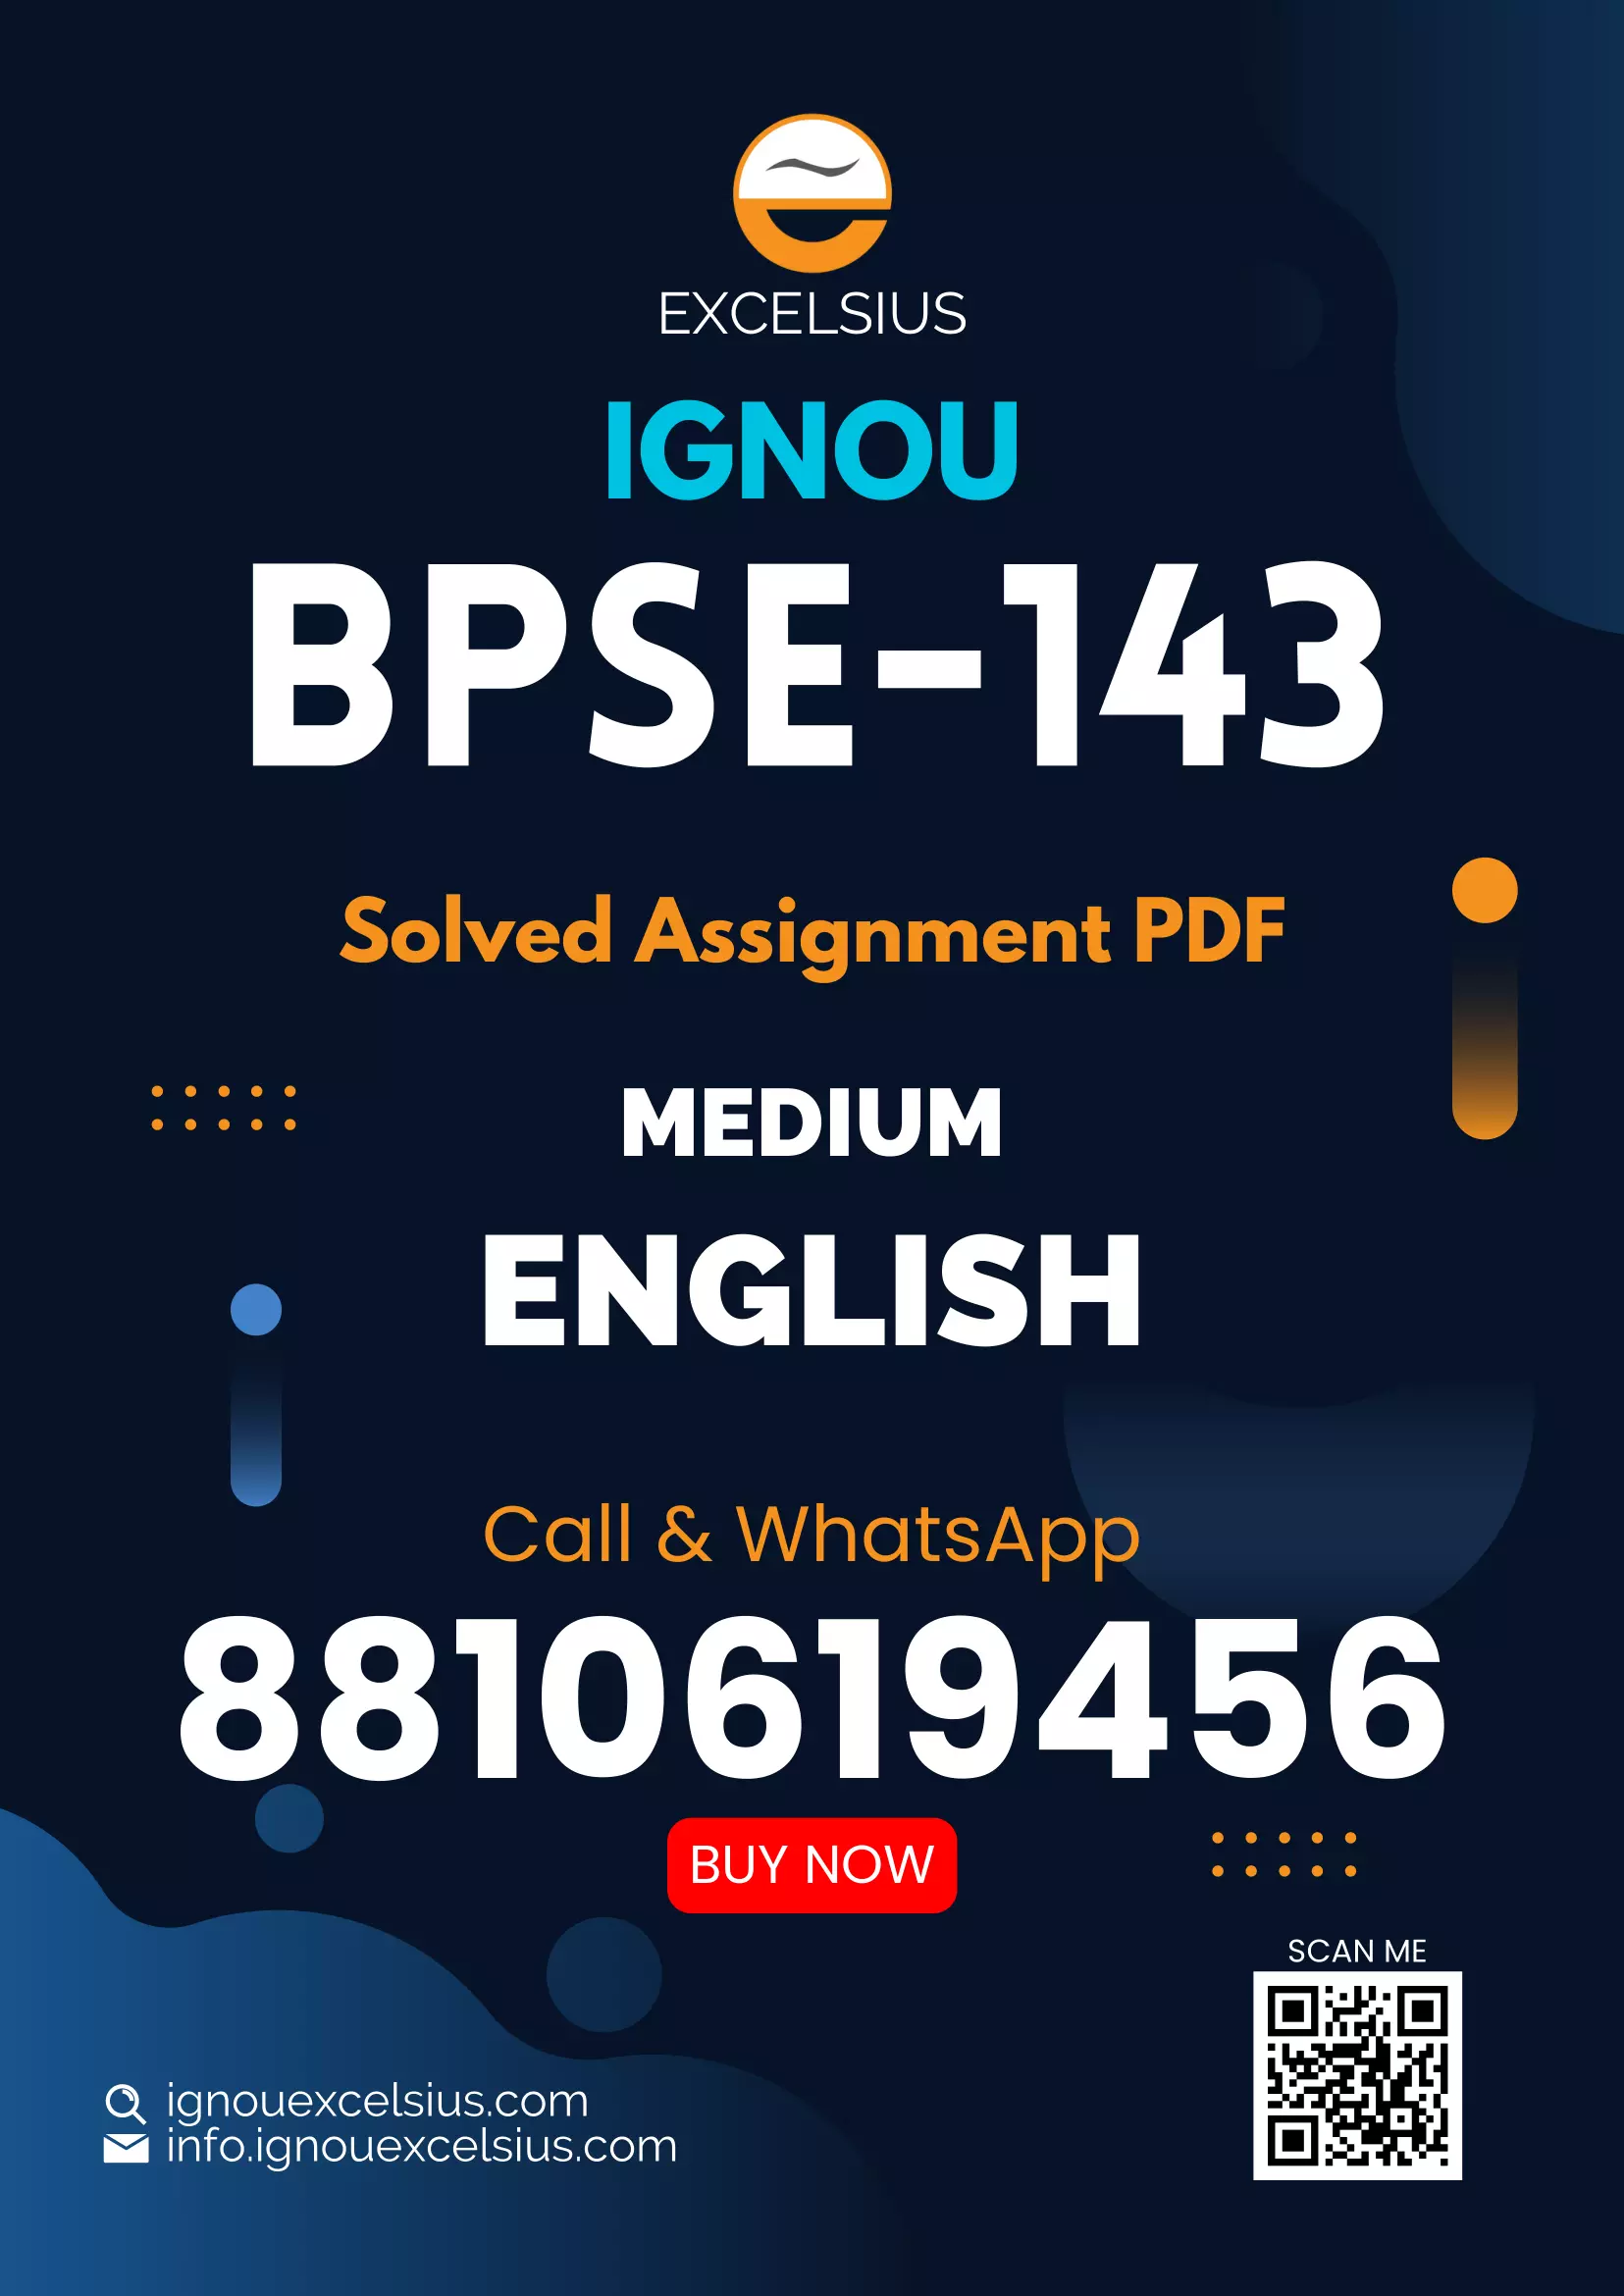 IGNOU BPSE-143 - State Politics in India, Latest Solved Assignment-July 2022 – January 2023